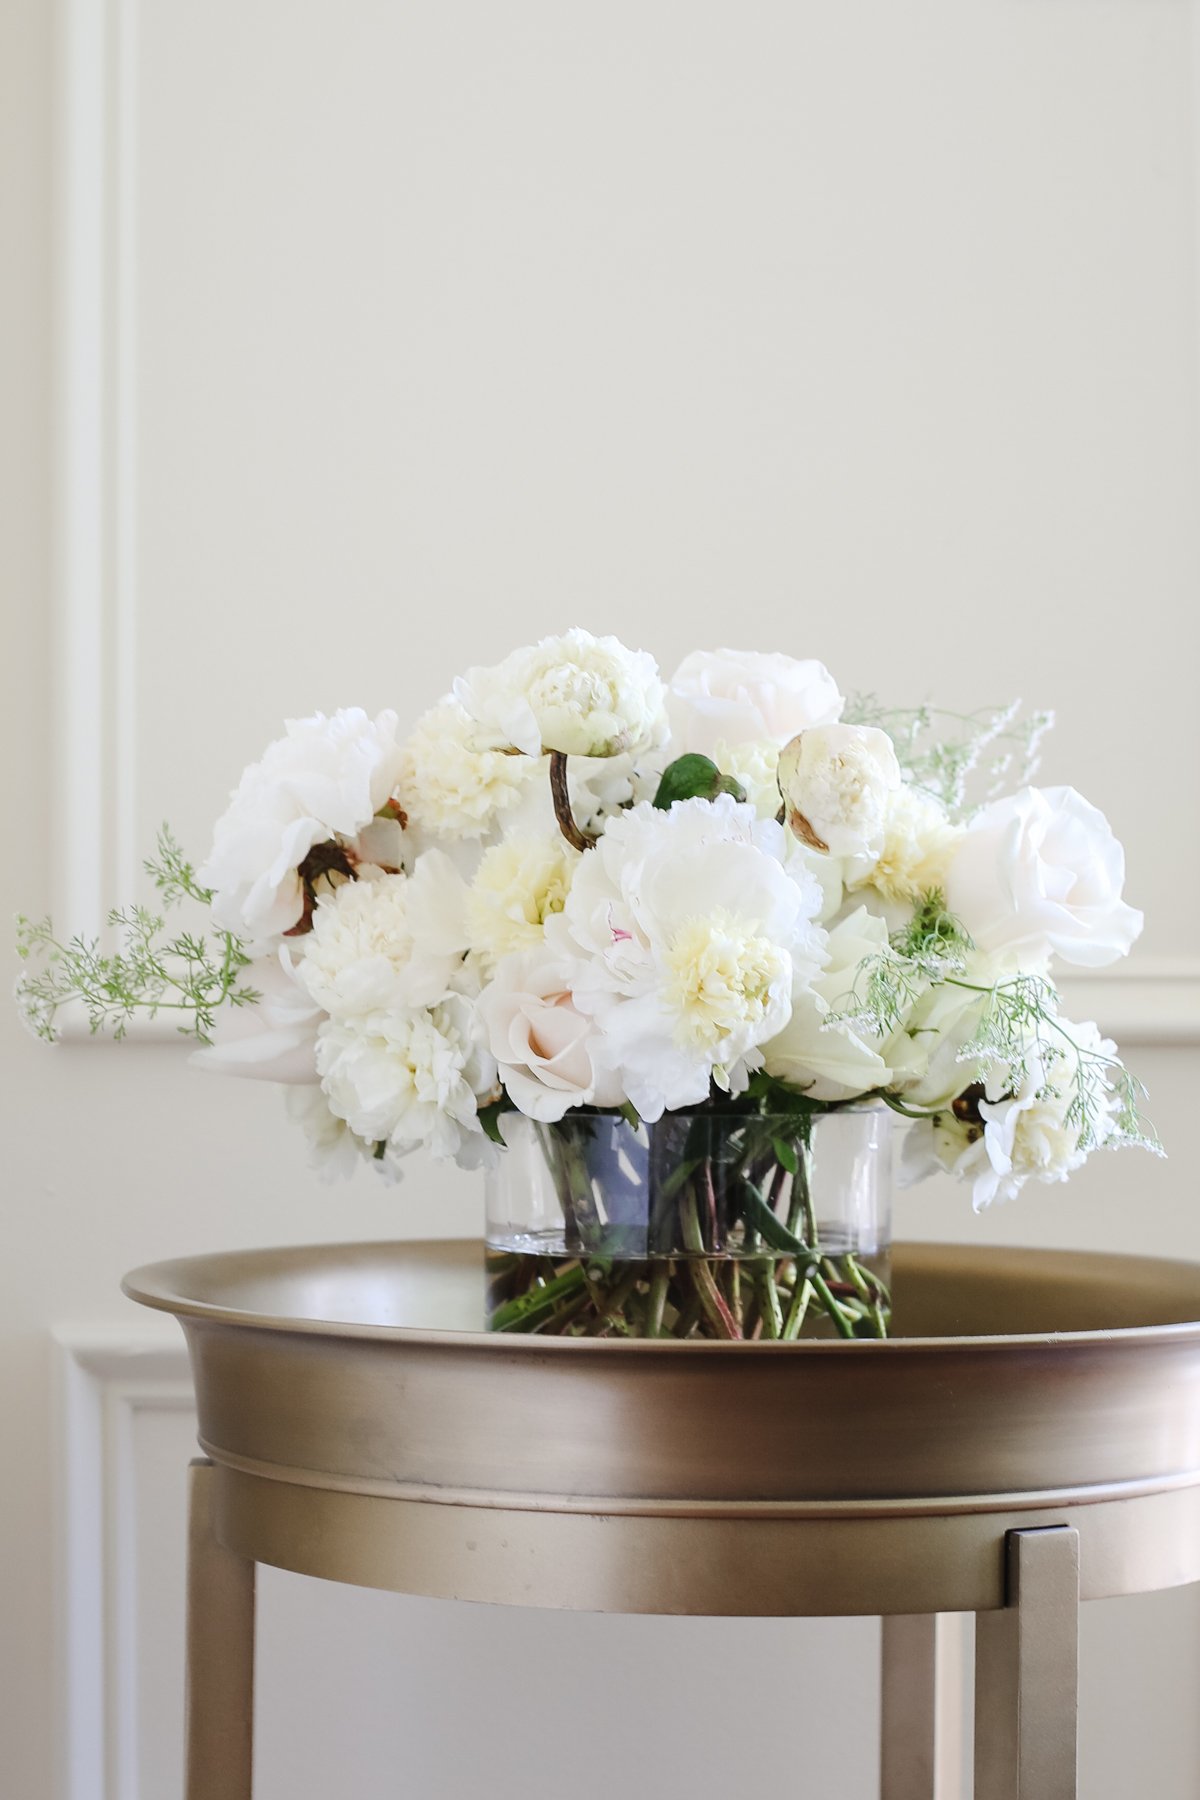 A bouquet of white peony flowers in a glass vase on a table.